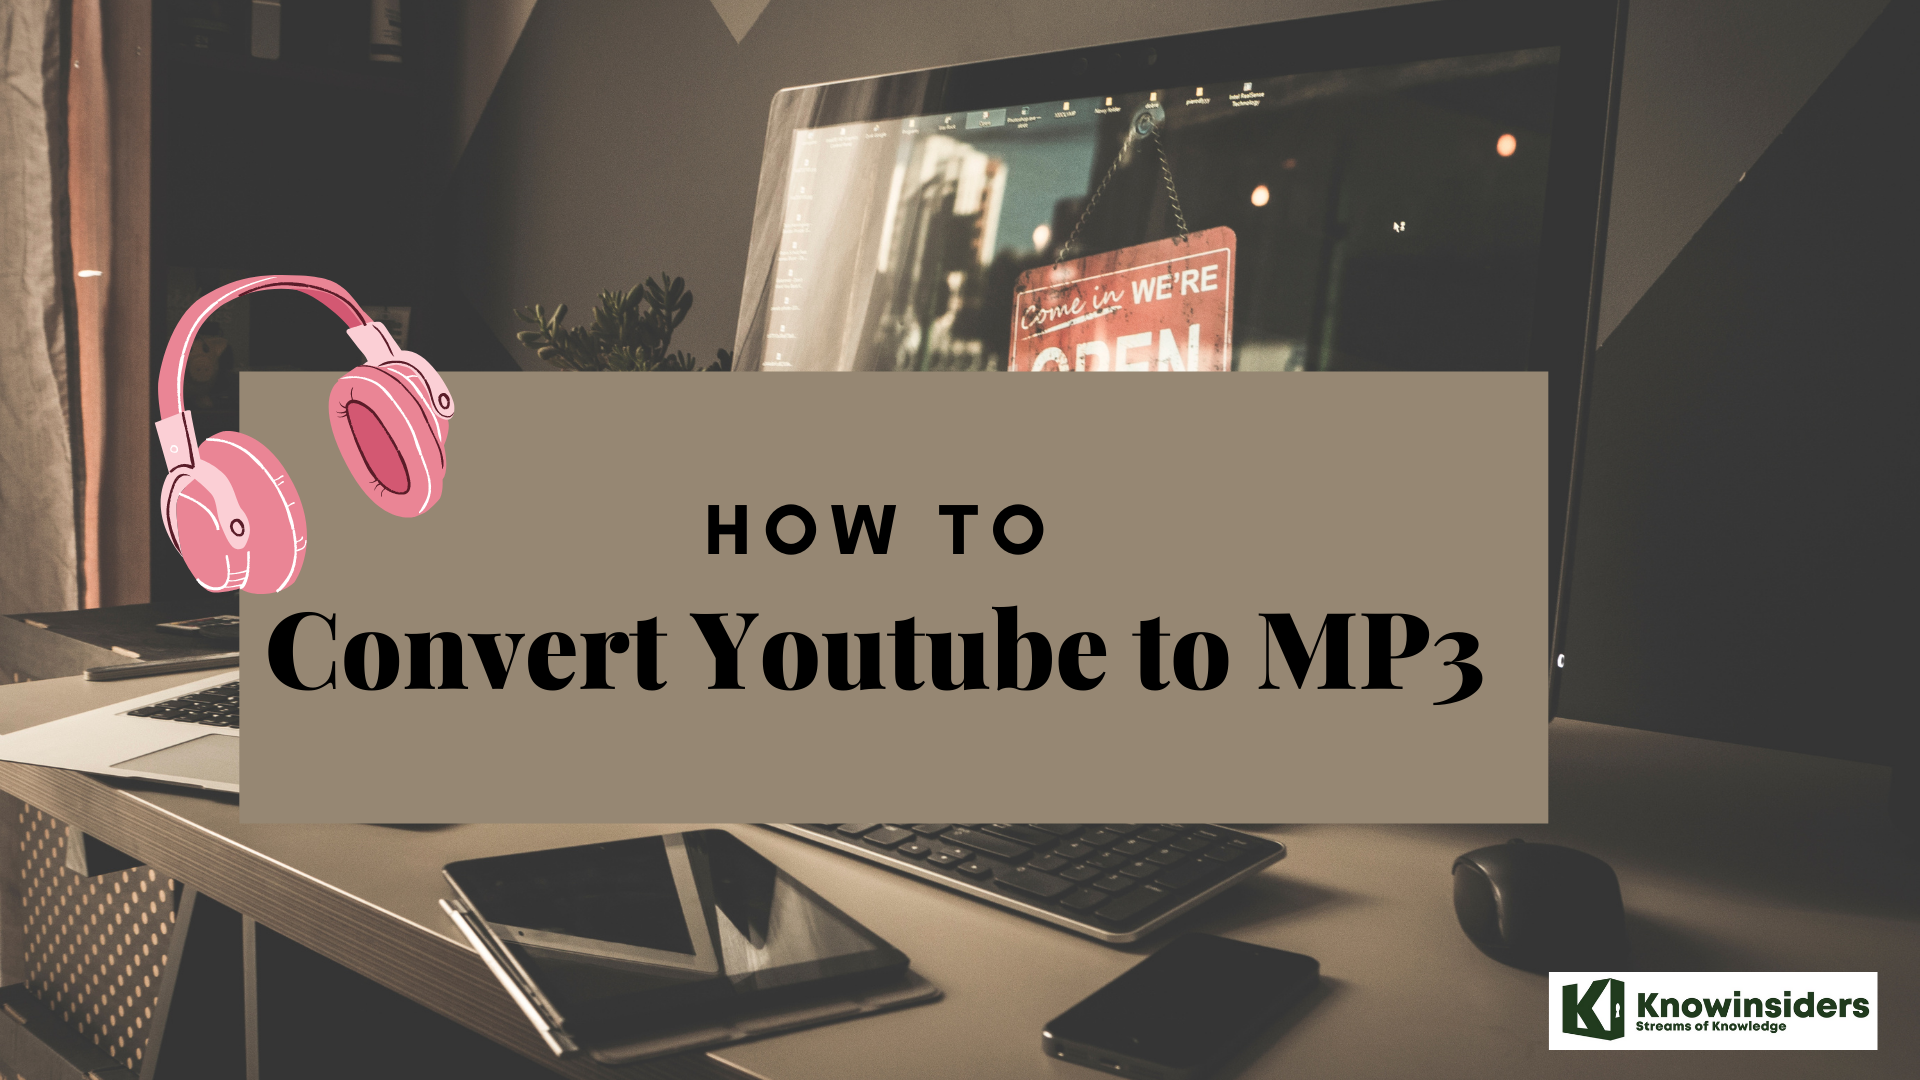 how to convert youtube videos to mp3 simple and easy steps